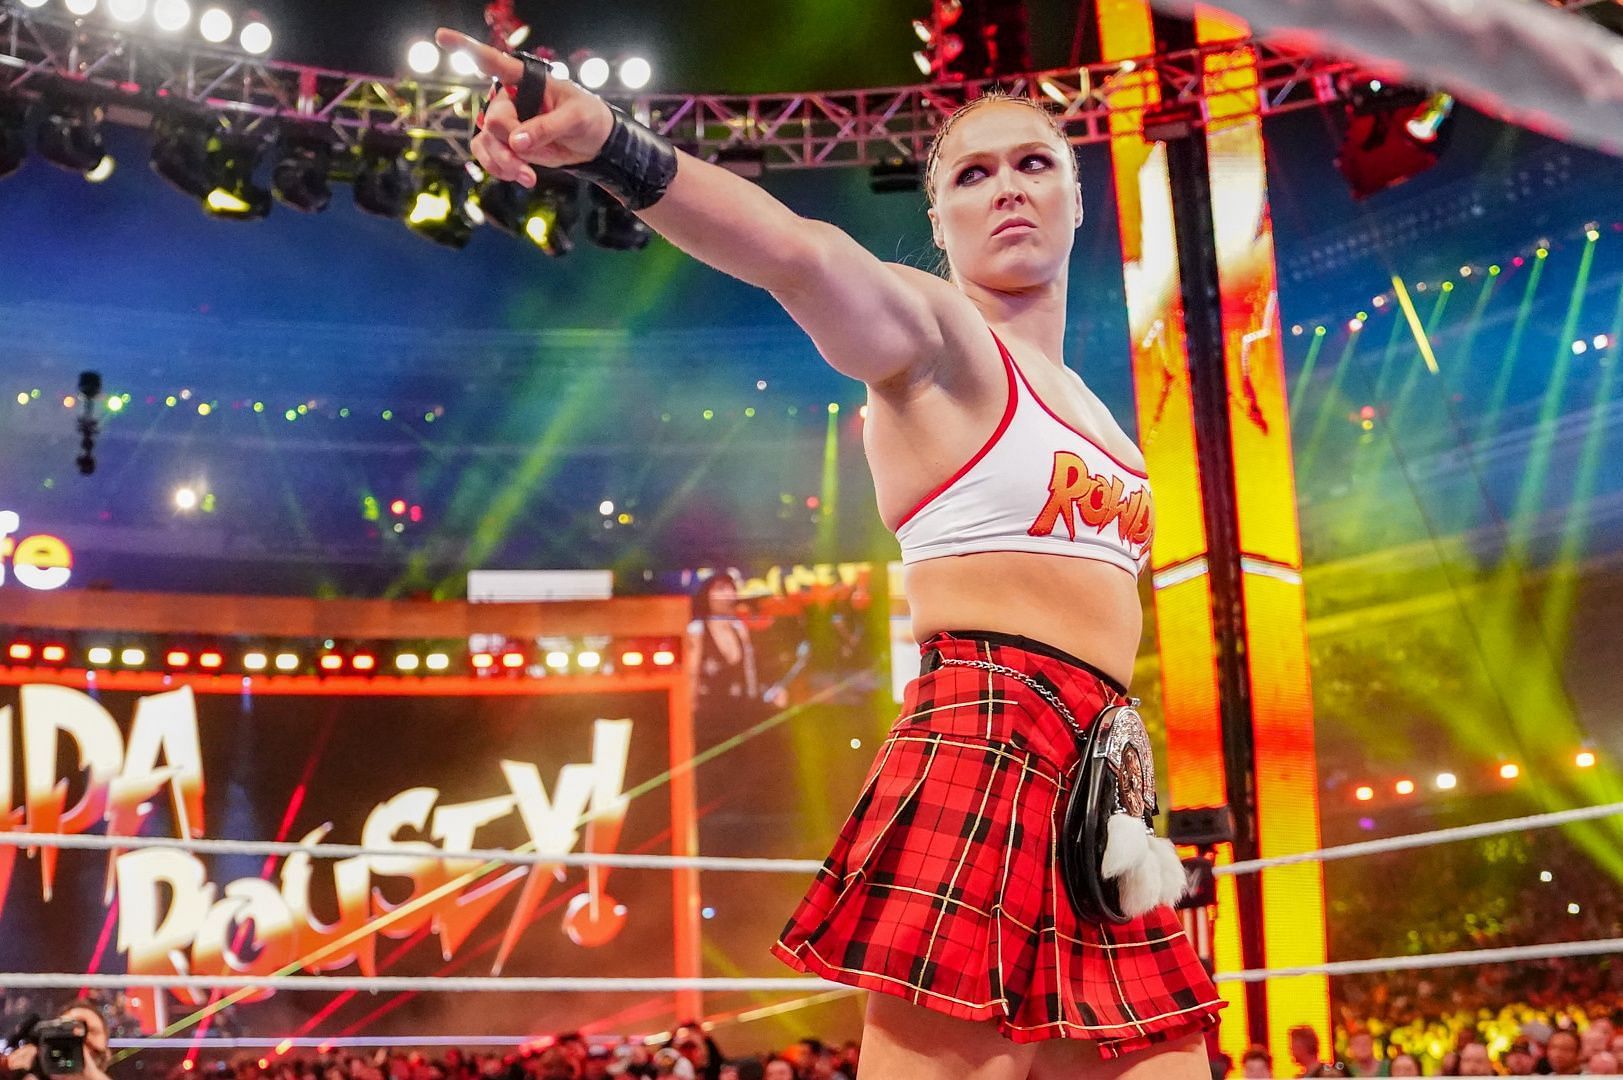 Ronda Rousey currently competes for WWE